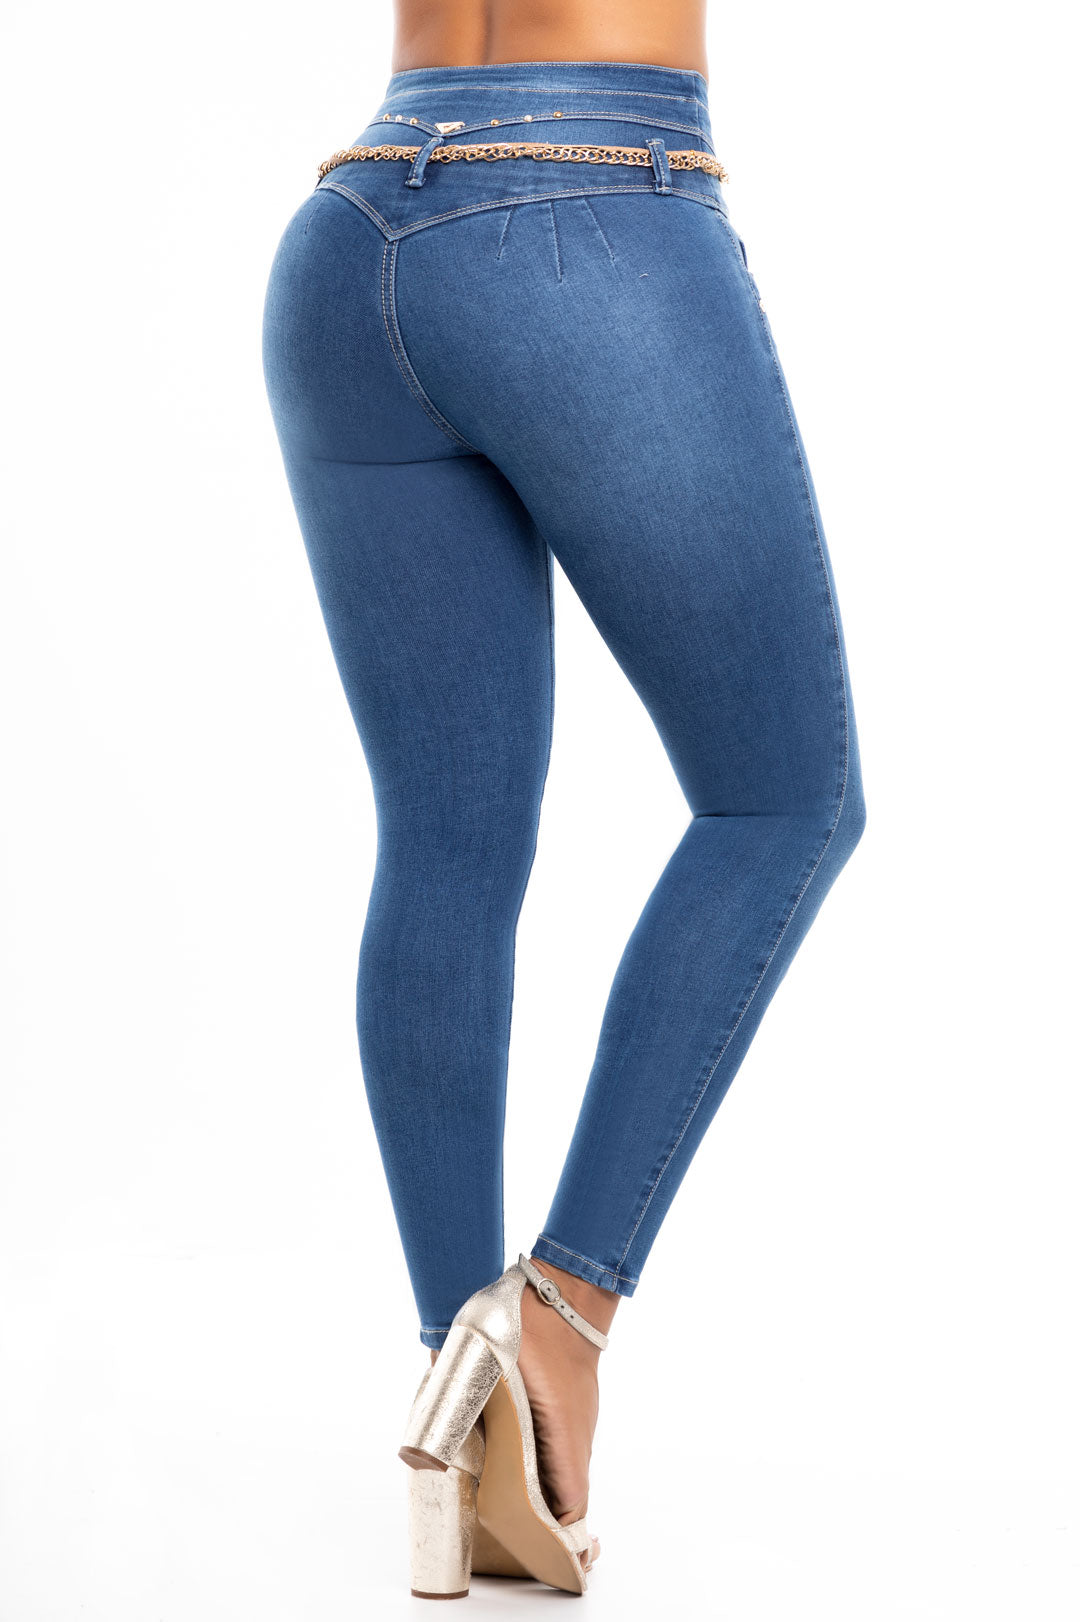 New Blue Colombian Push Up Jeans Levanta Cola Curvy Jeggings Butt Lifting  Pants